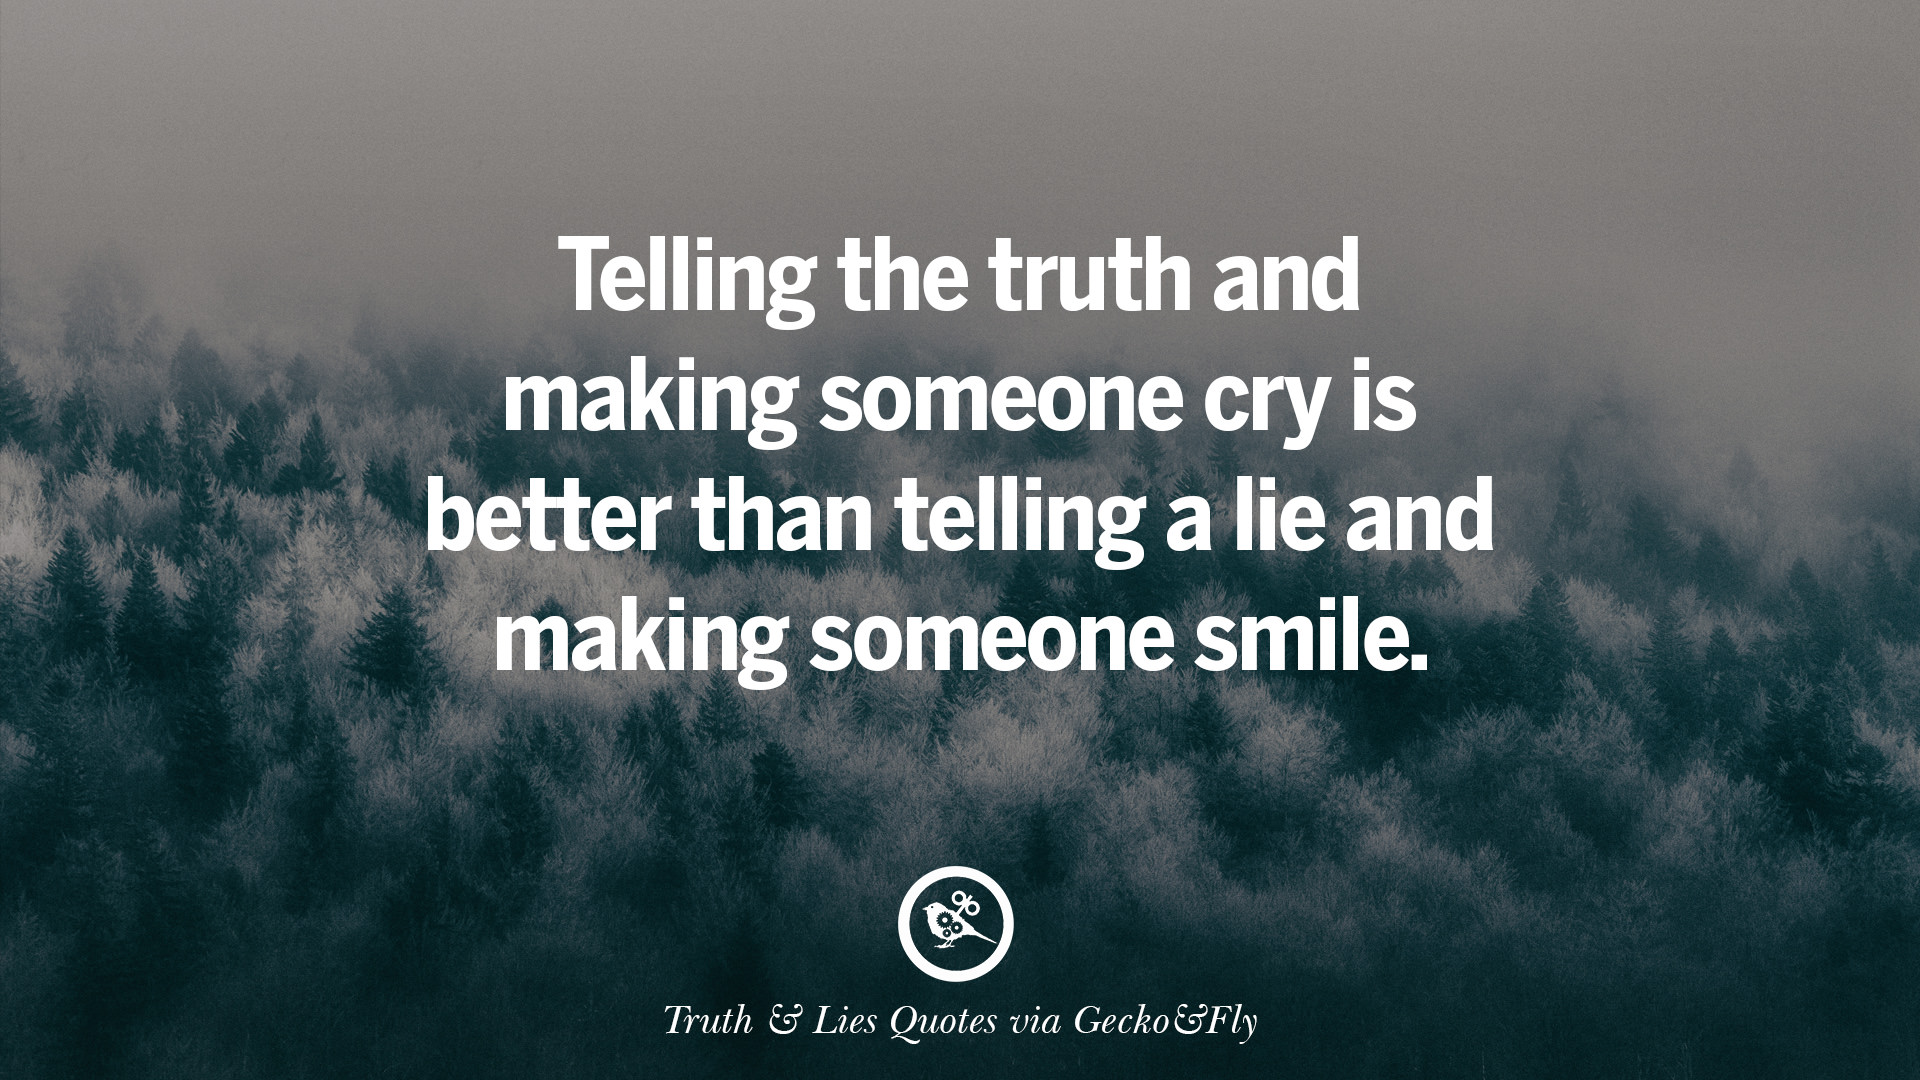 Telling the truth and making someone cry is better than telling a lie and m...